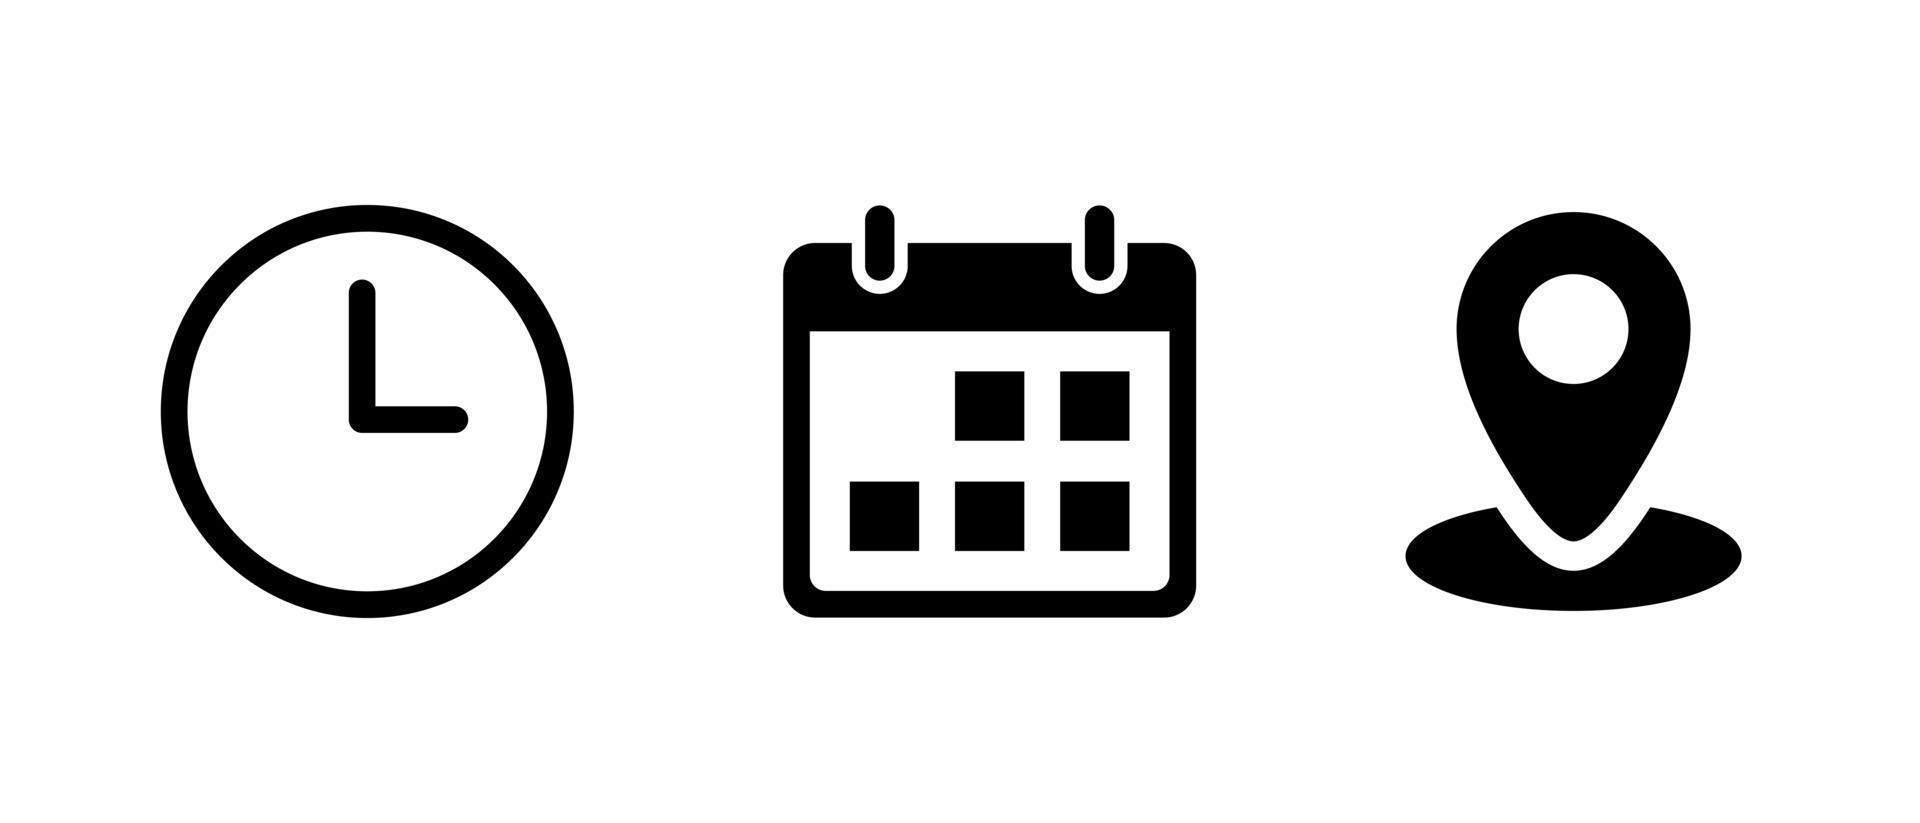 Time, date, and address icon vector. Event elements vector